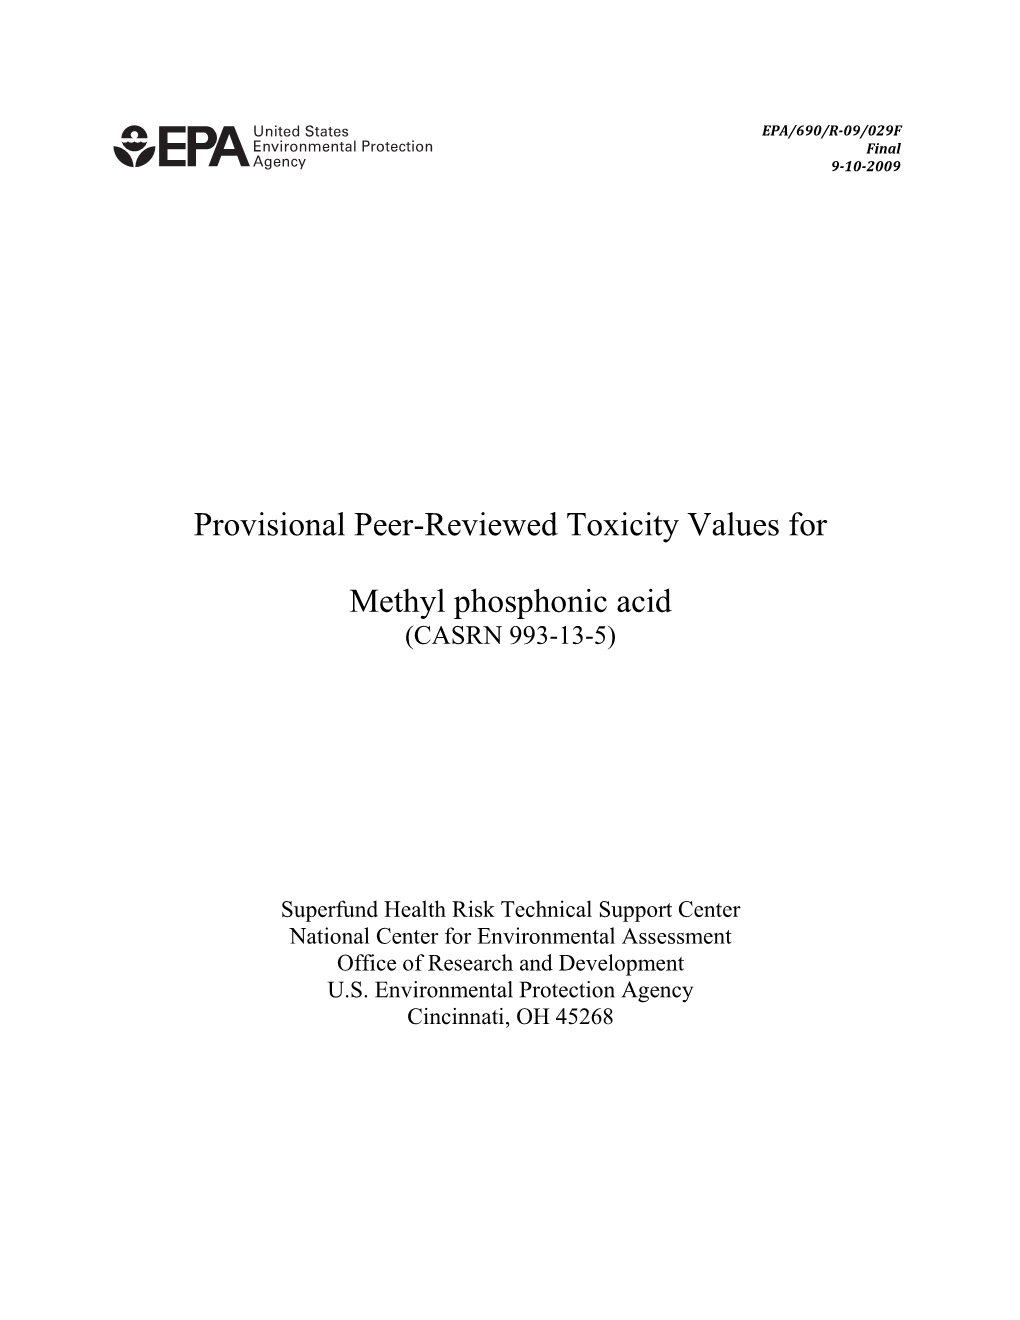 Provisional Peer-Reviewed Toxicity Values for Methyl Phosphonic Acid (Casrn 993-13-5)